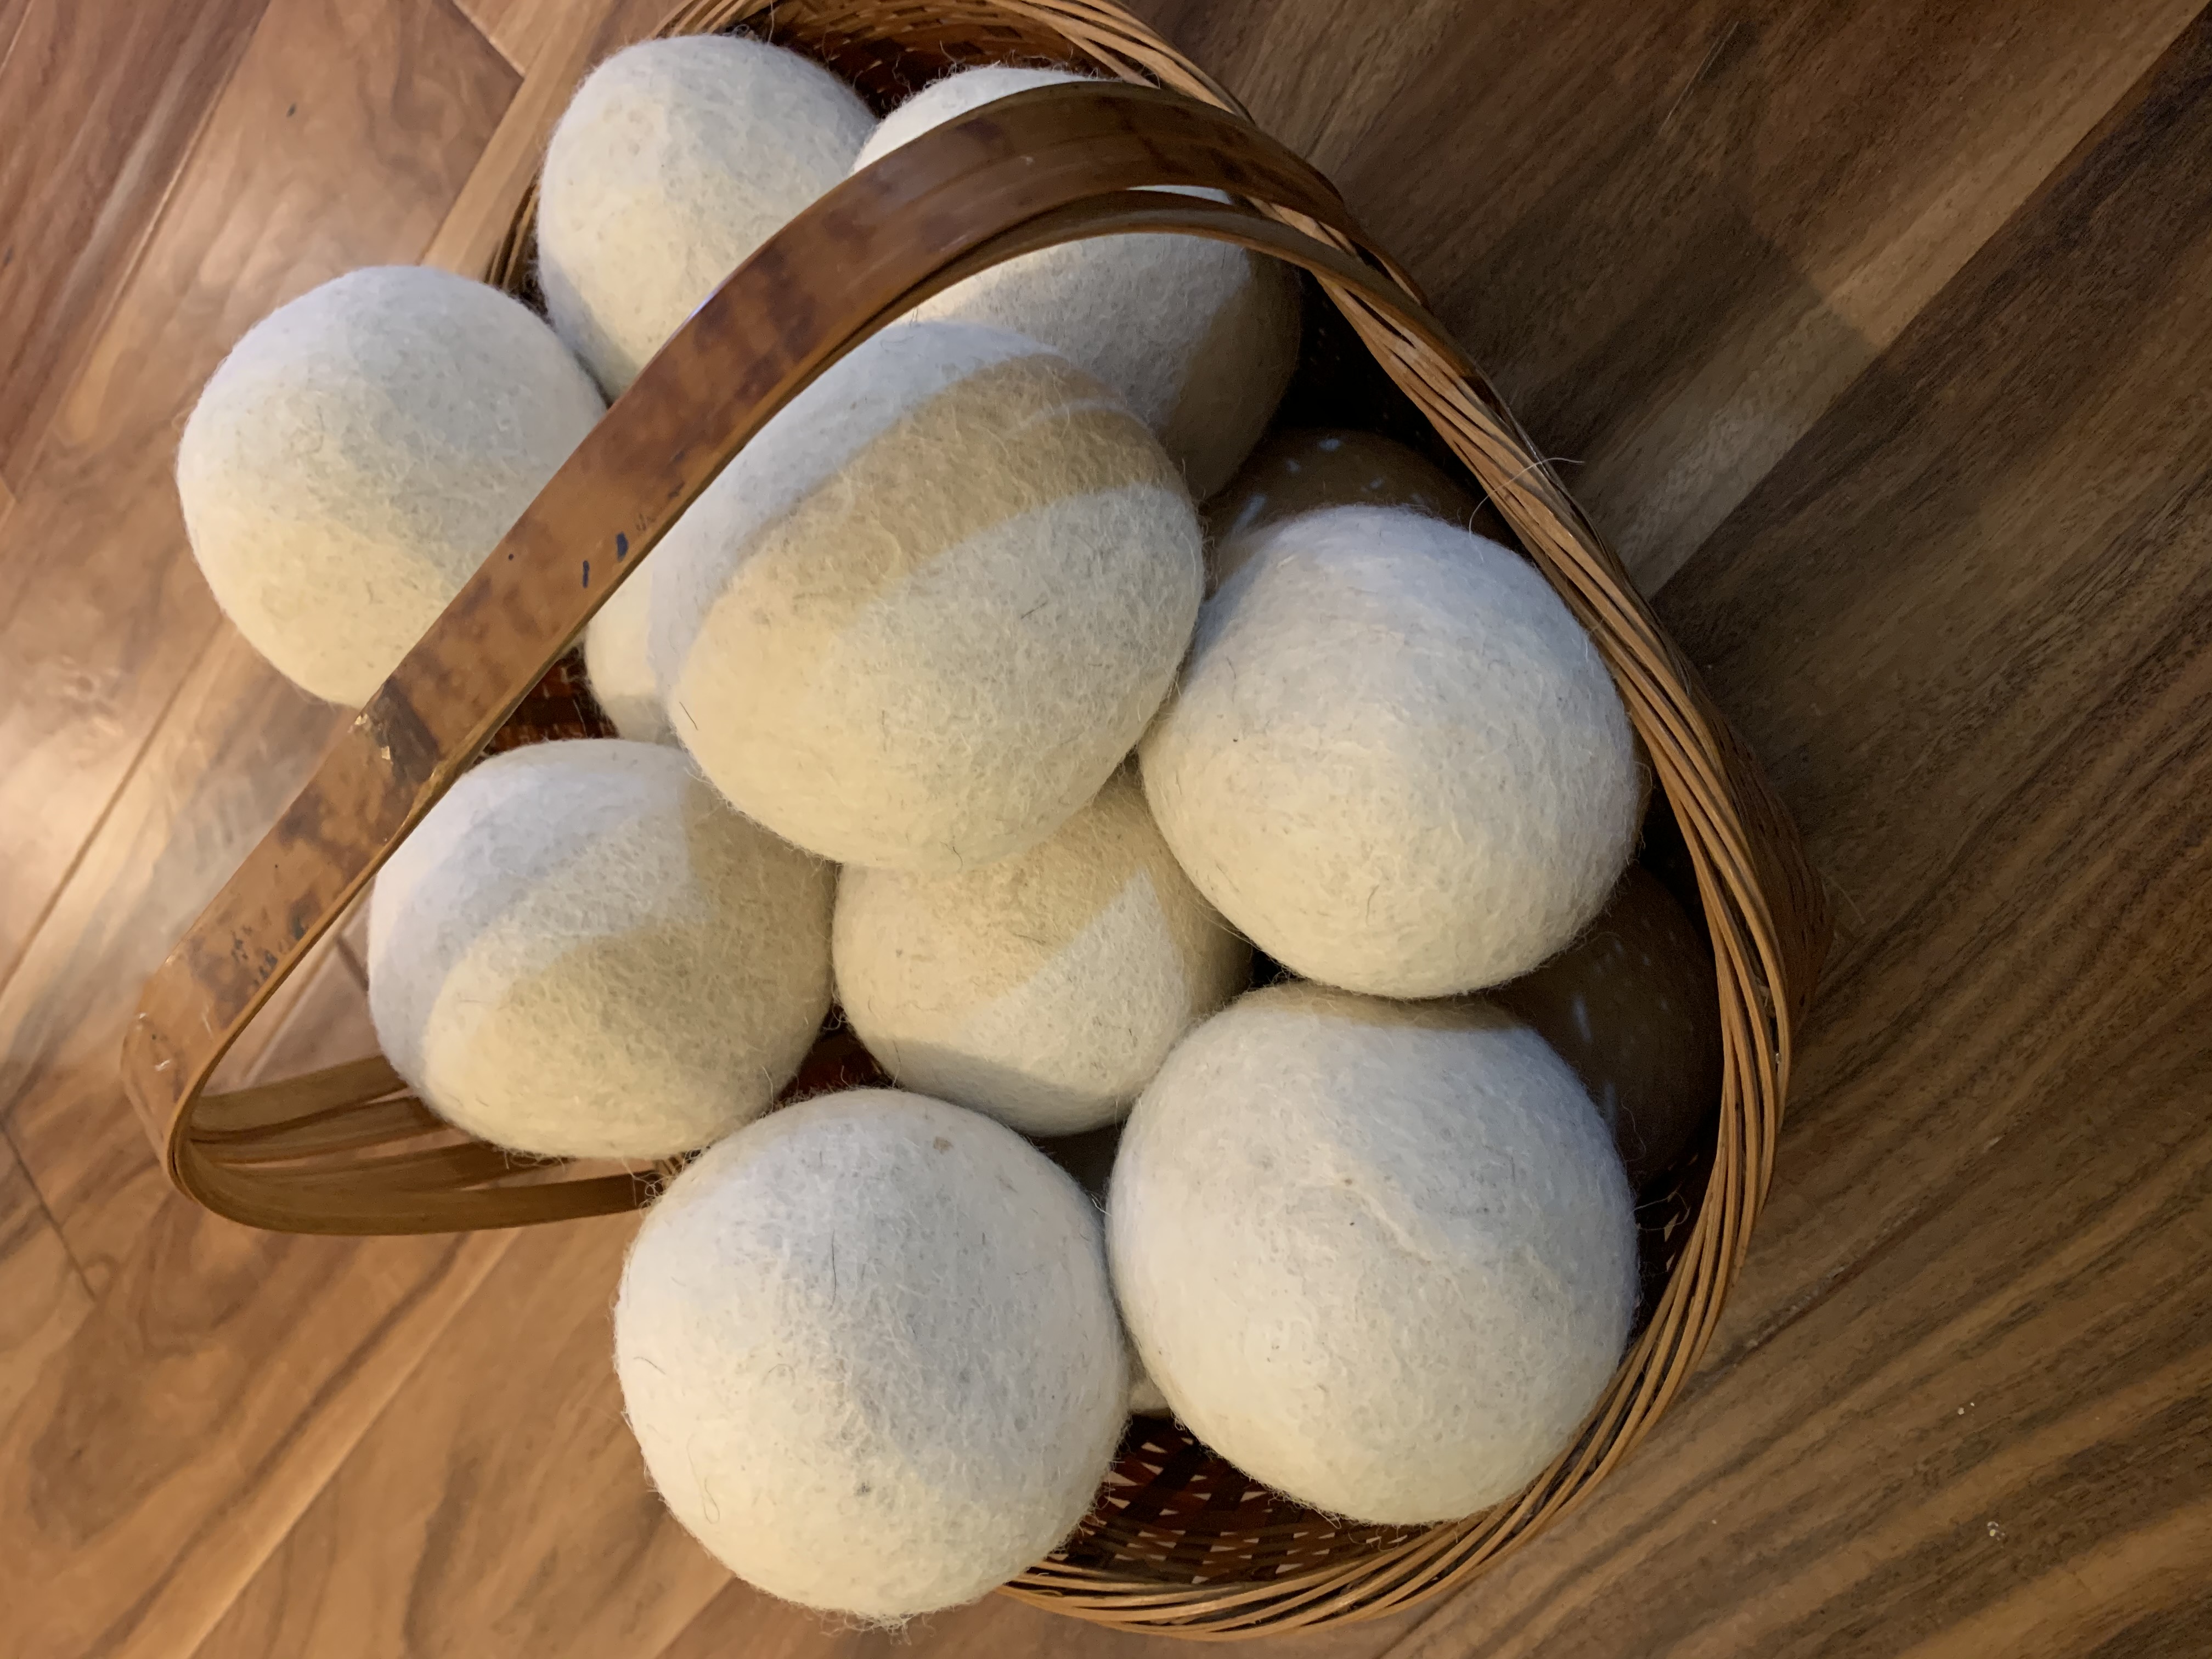 Set of Two Felted Wool Dryer Balls - NikkiDesigns